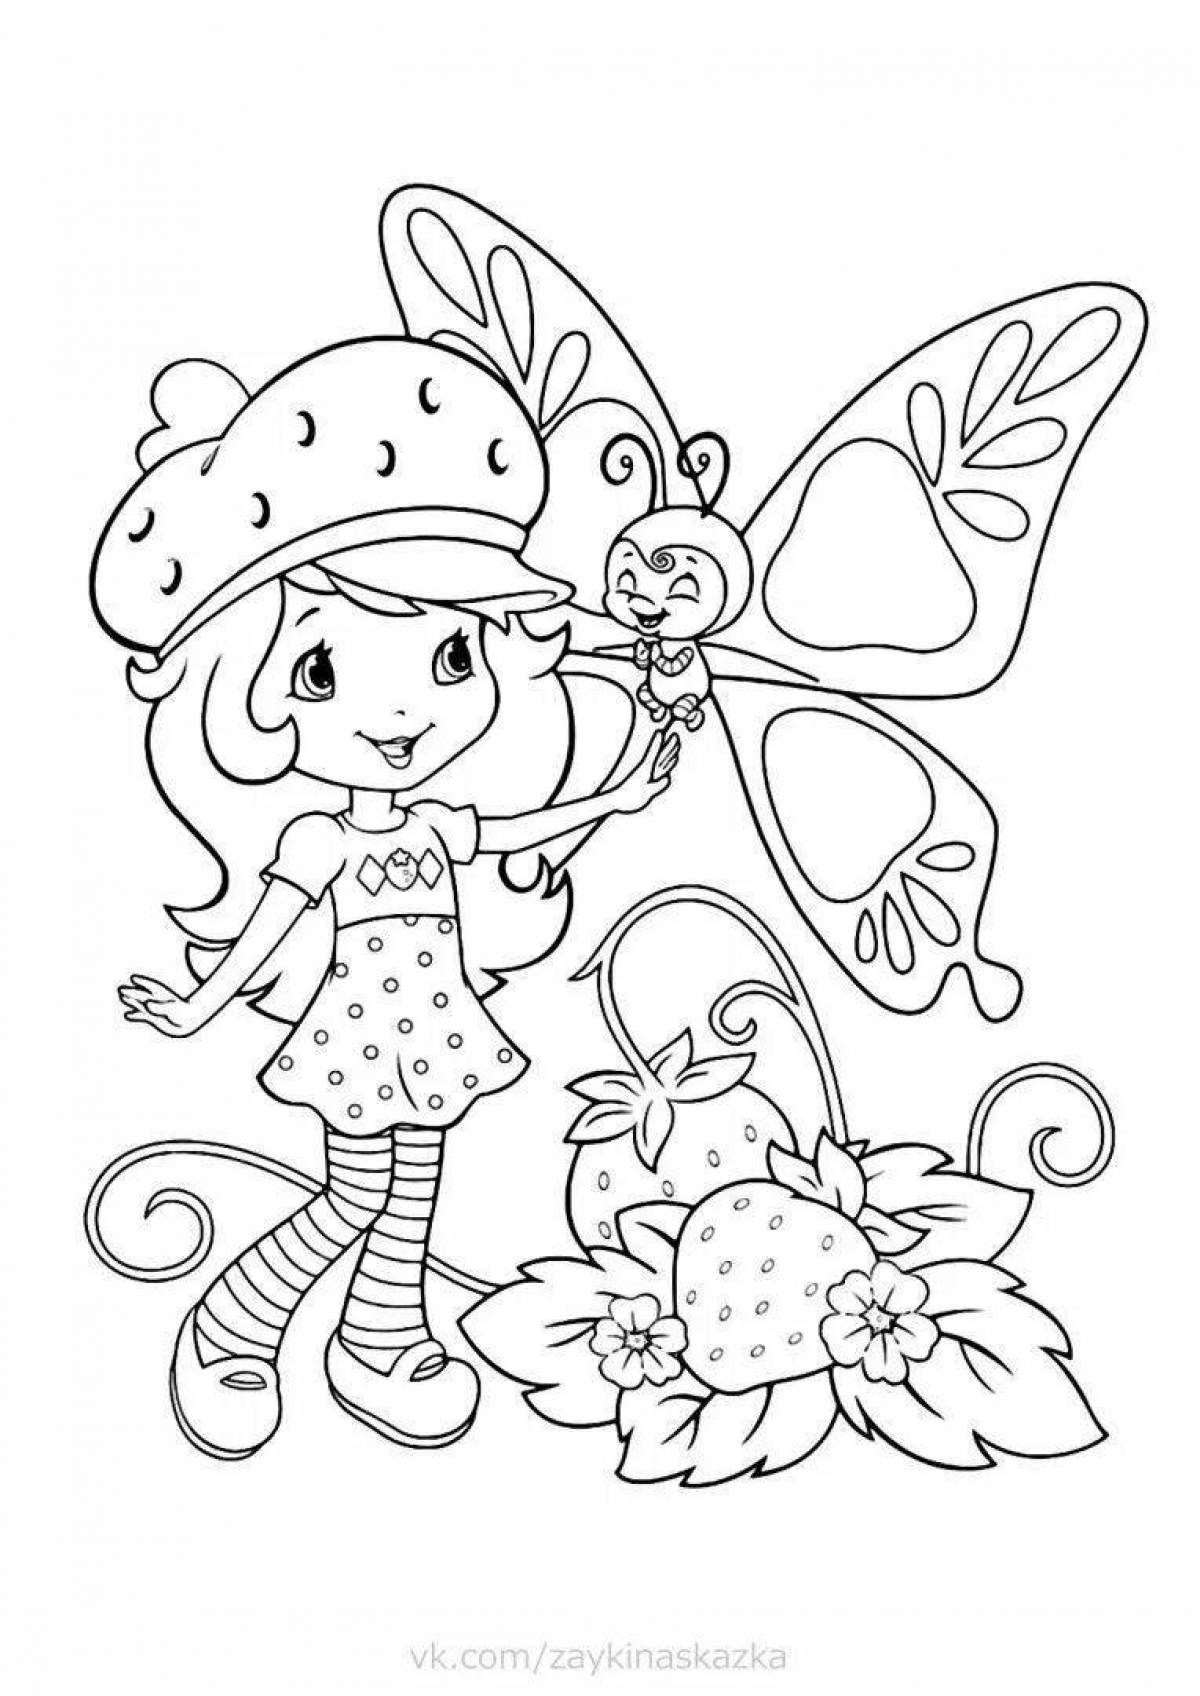 Cute strawberry coloring book for girls